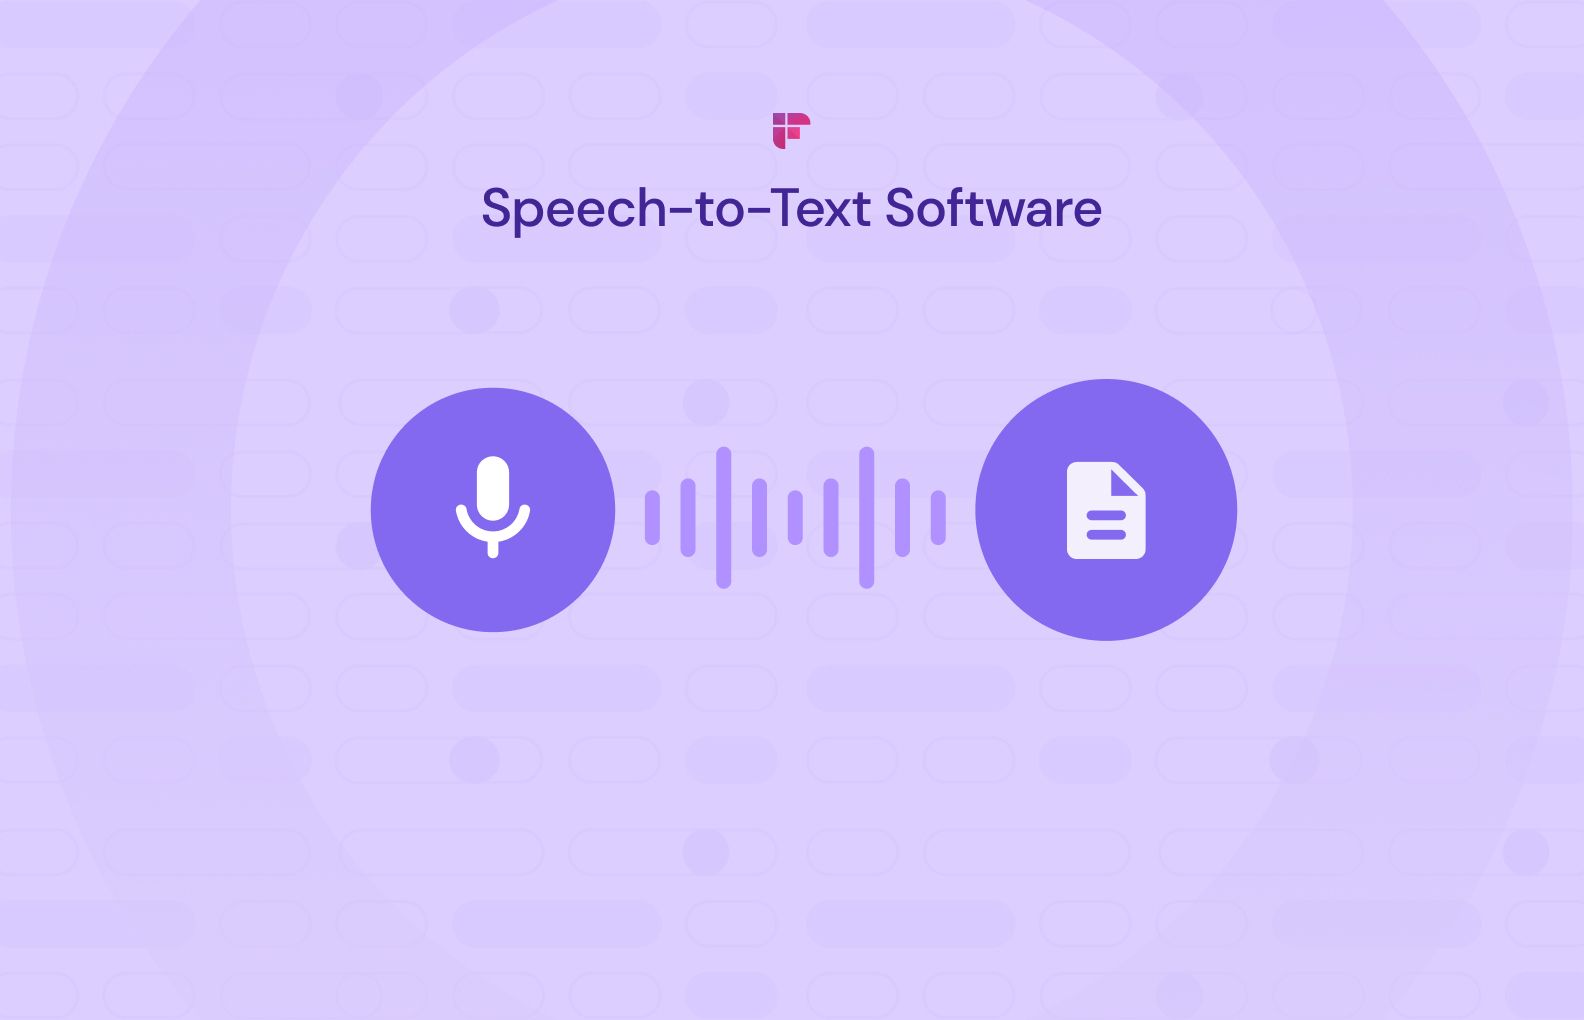 text to speech software explanation